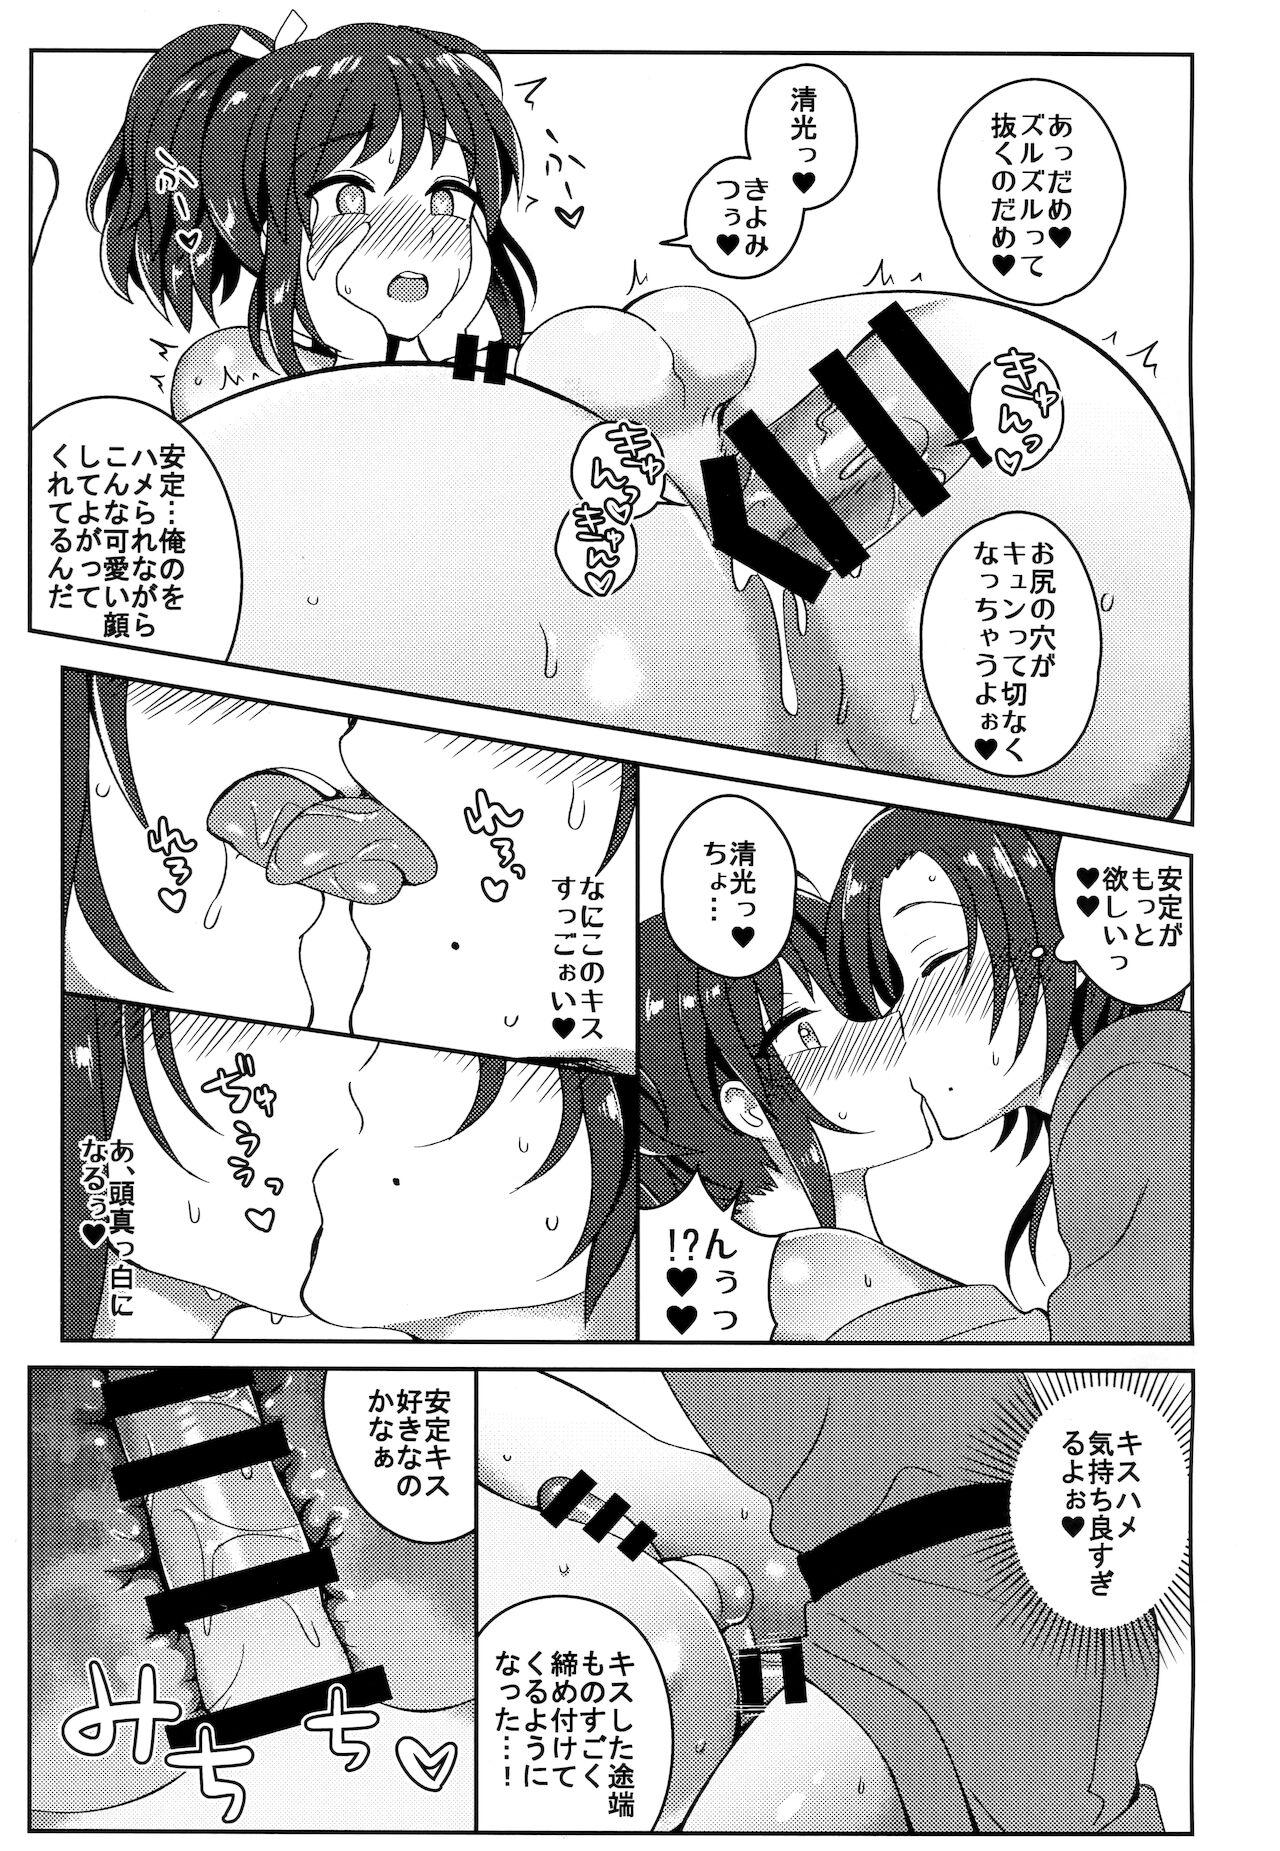 Safadinha Face to Face - Touken ranbu Relax - Page 12